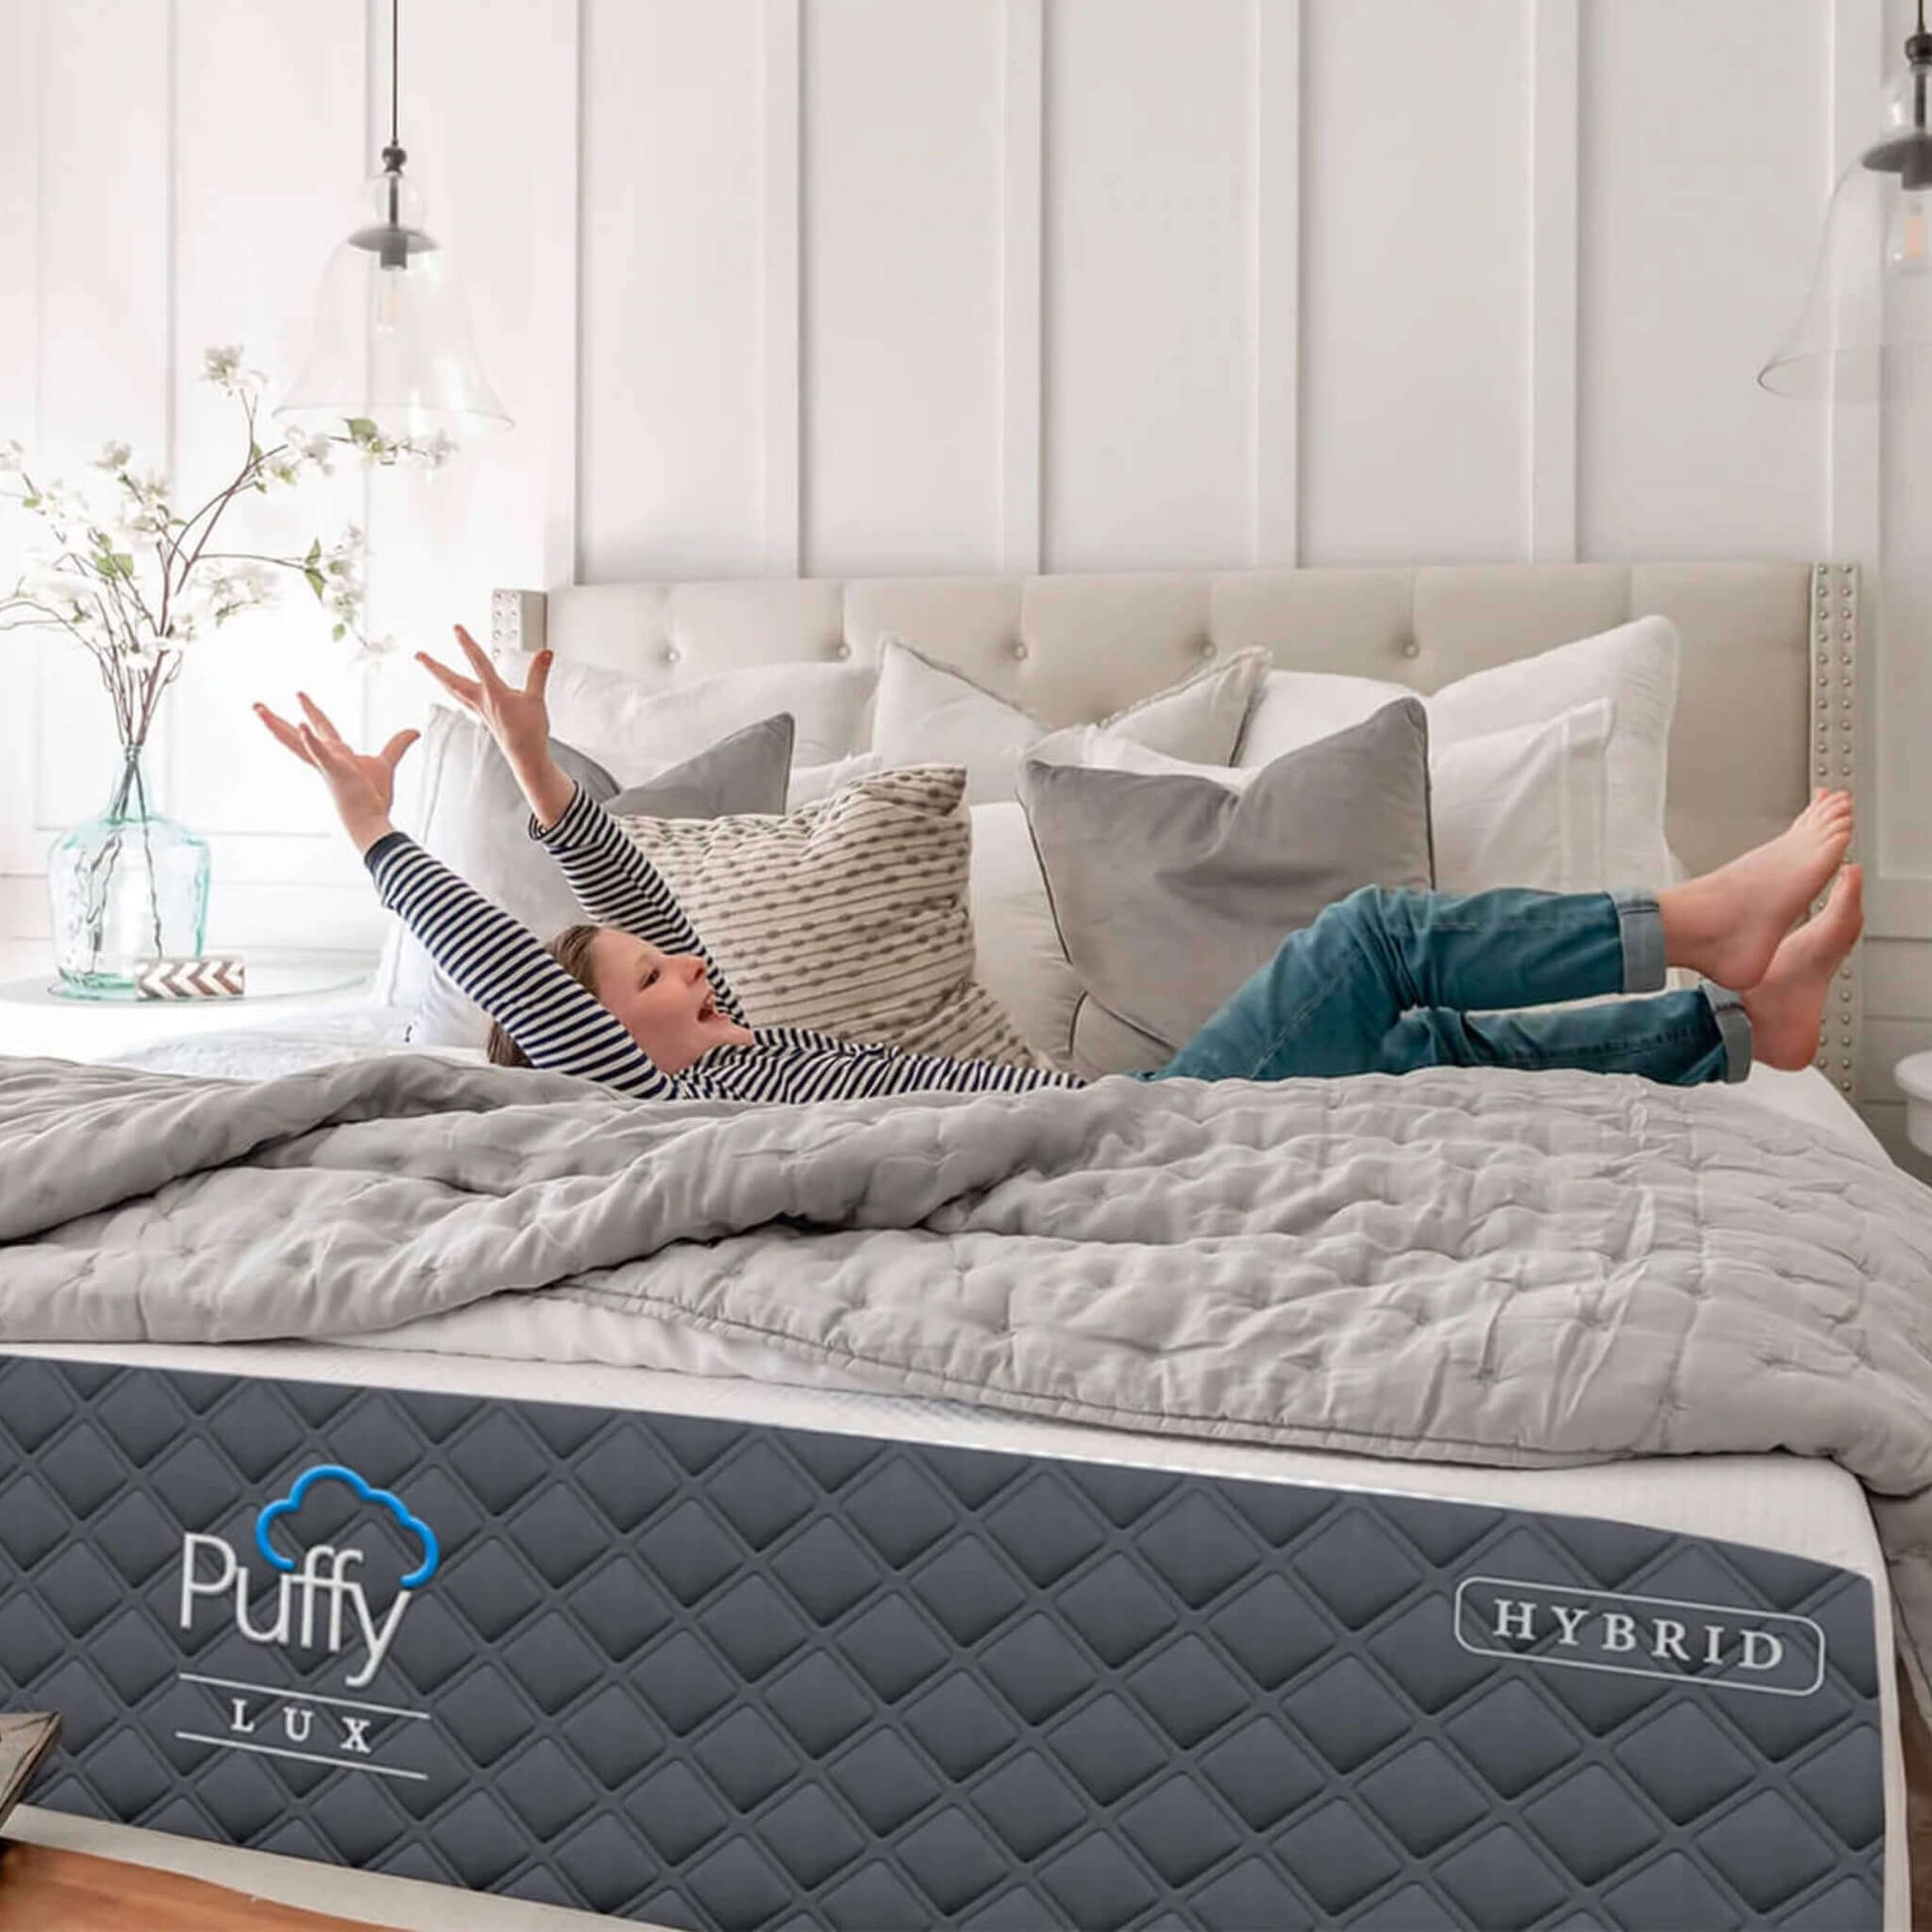 Puffy Lux Hybrid Mattress: The Best of Comfort and Support